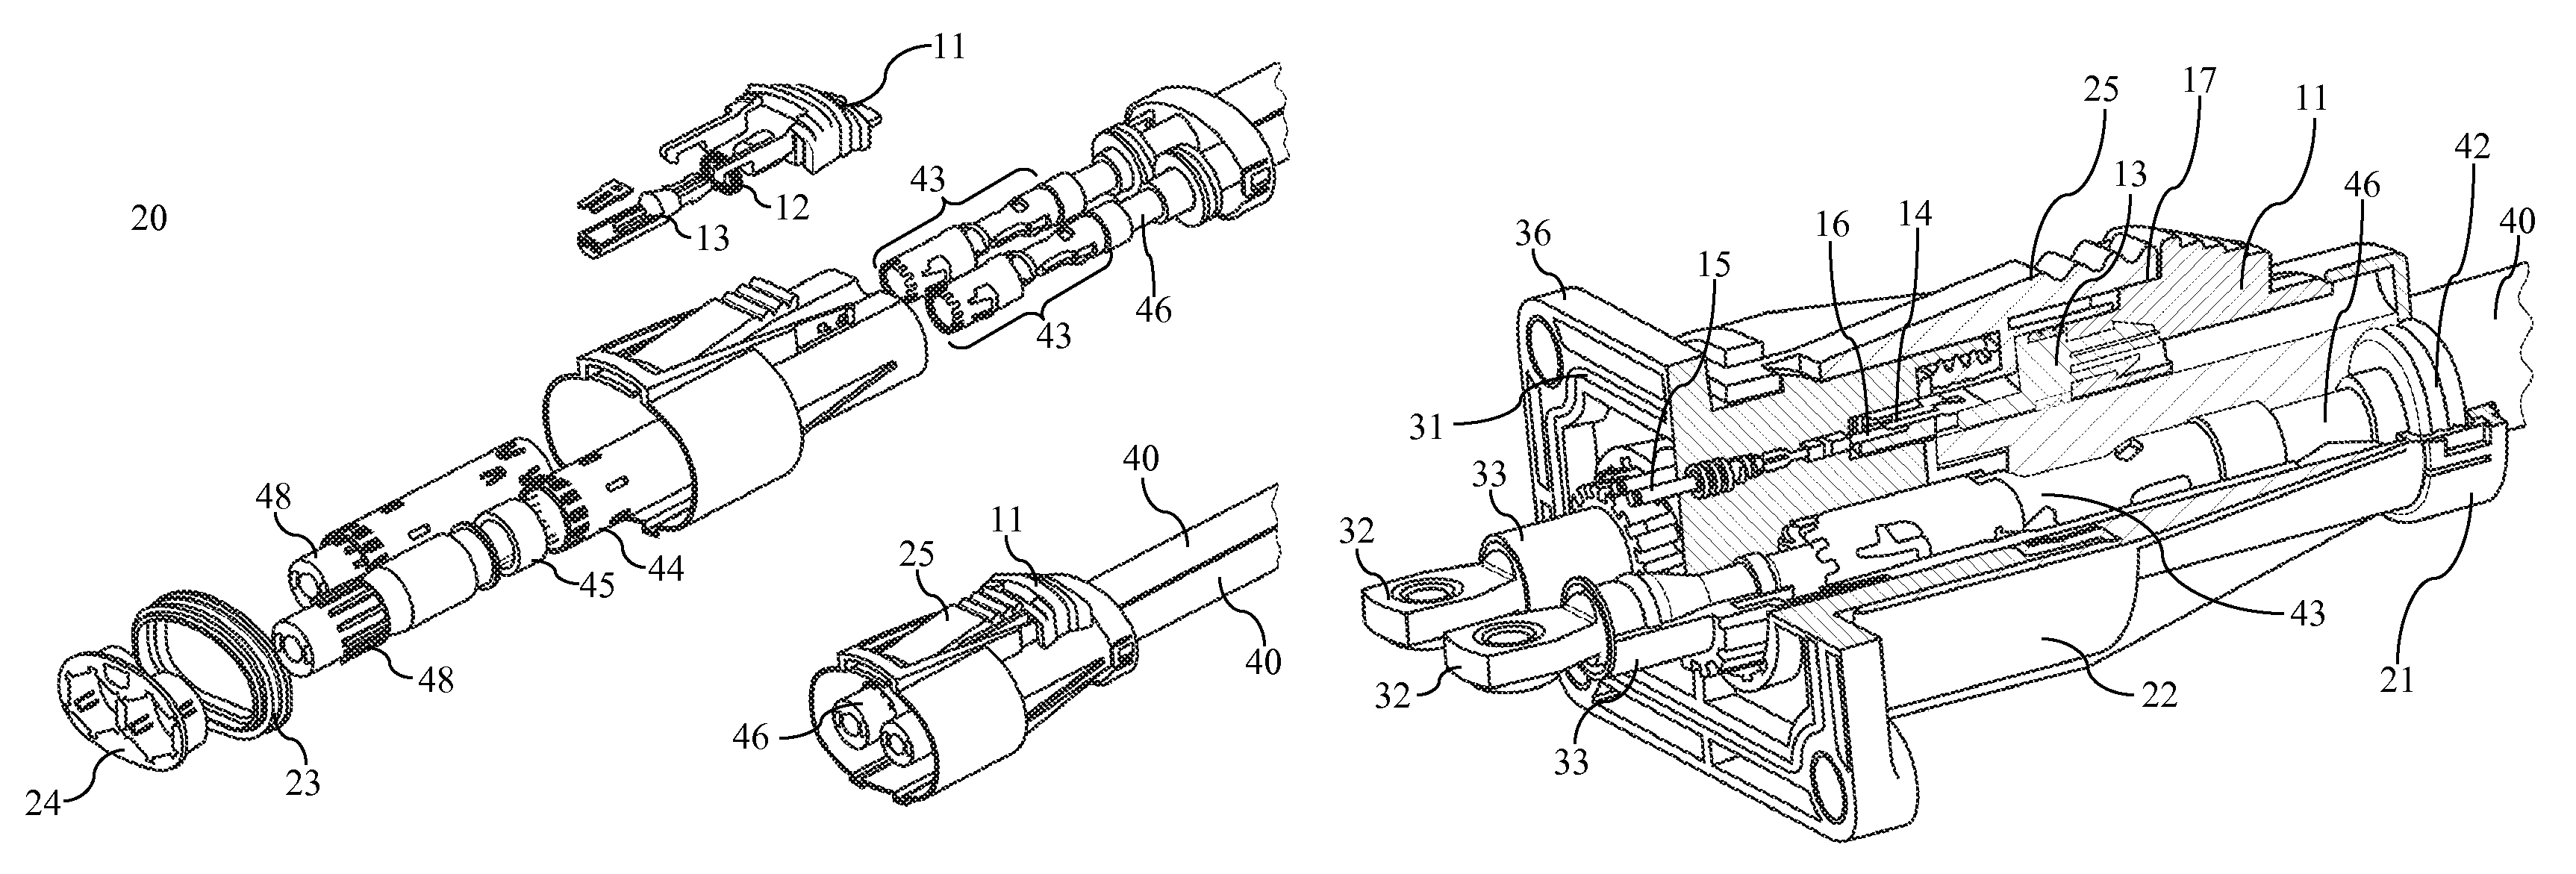 Electrical connector system